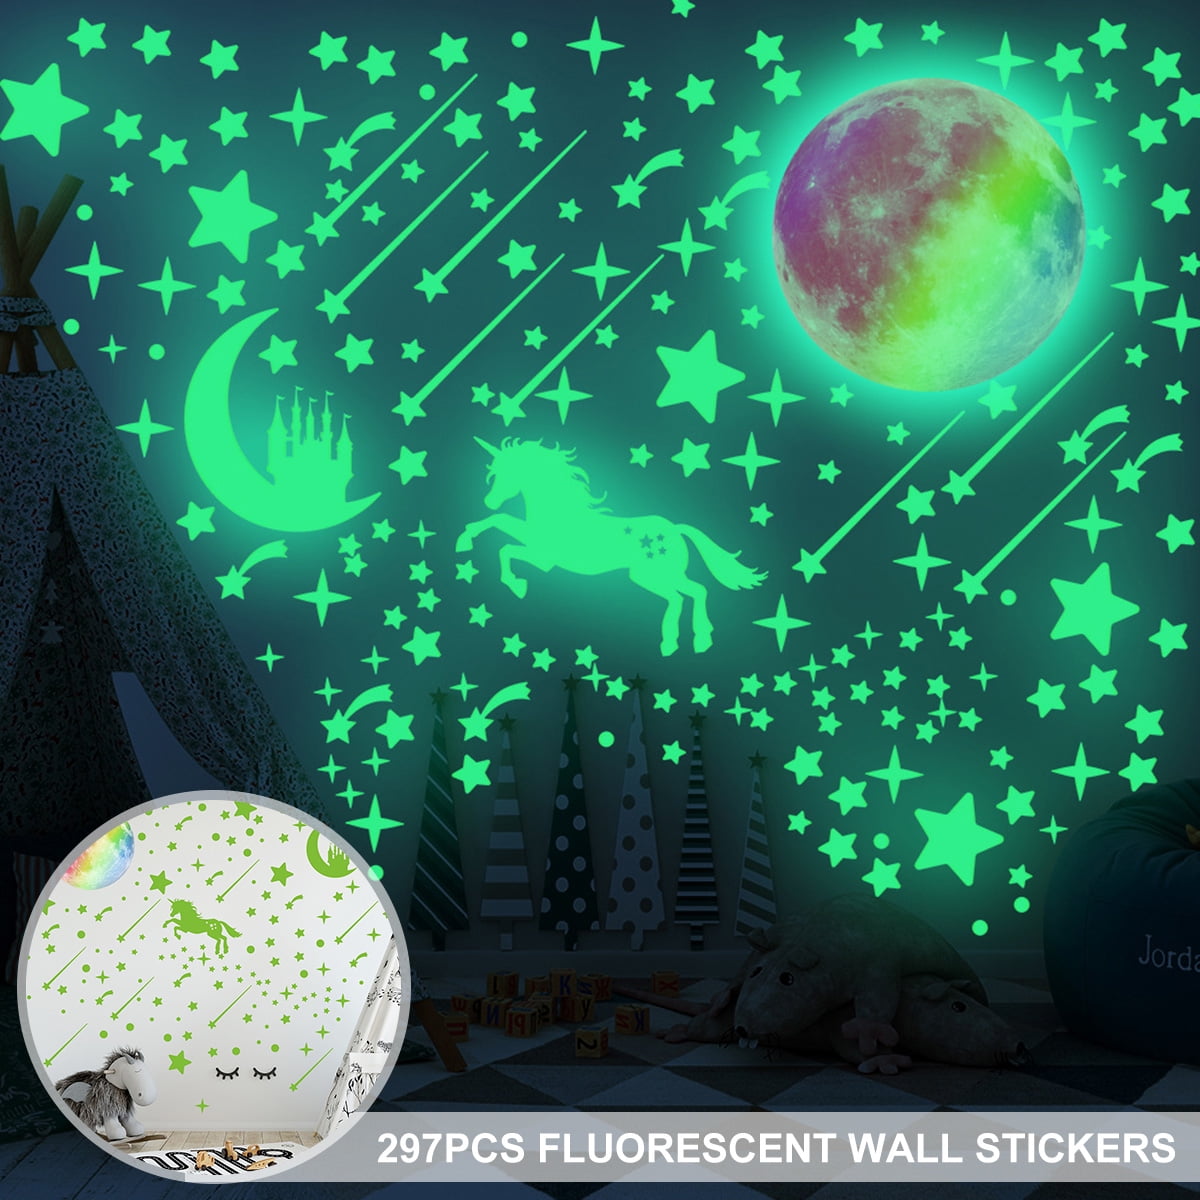 Details about   GLOW IN THE DARK MOON AND STAR SET FOR KIDS BEDROOM 